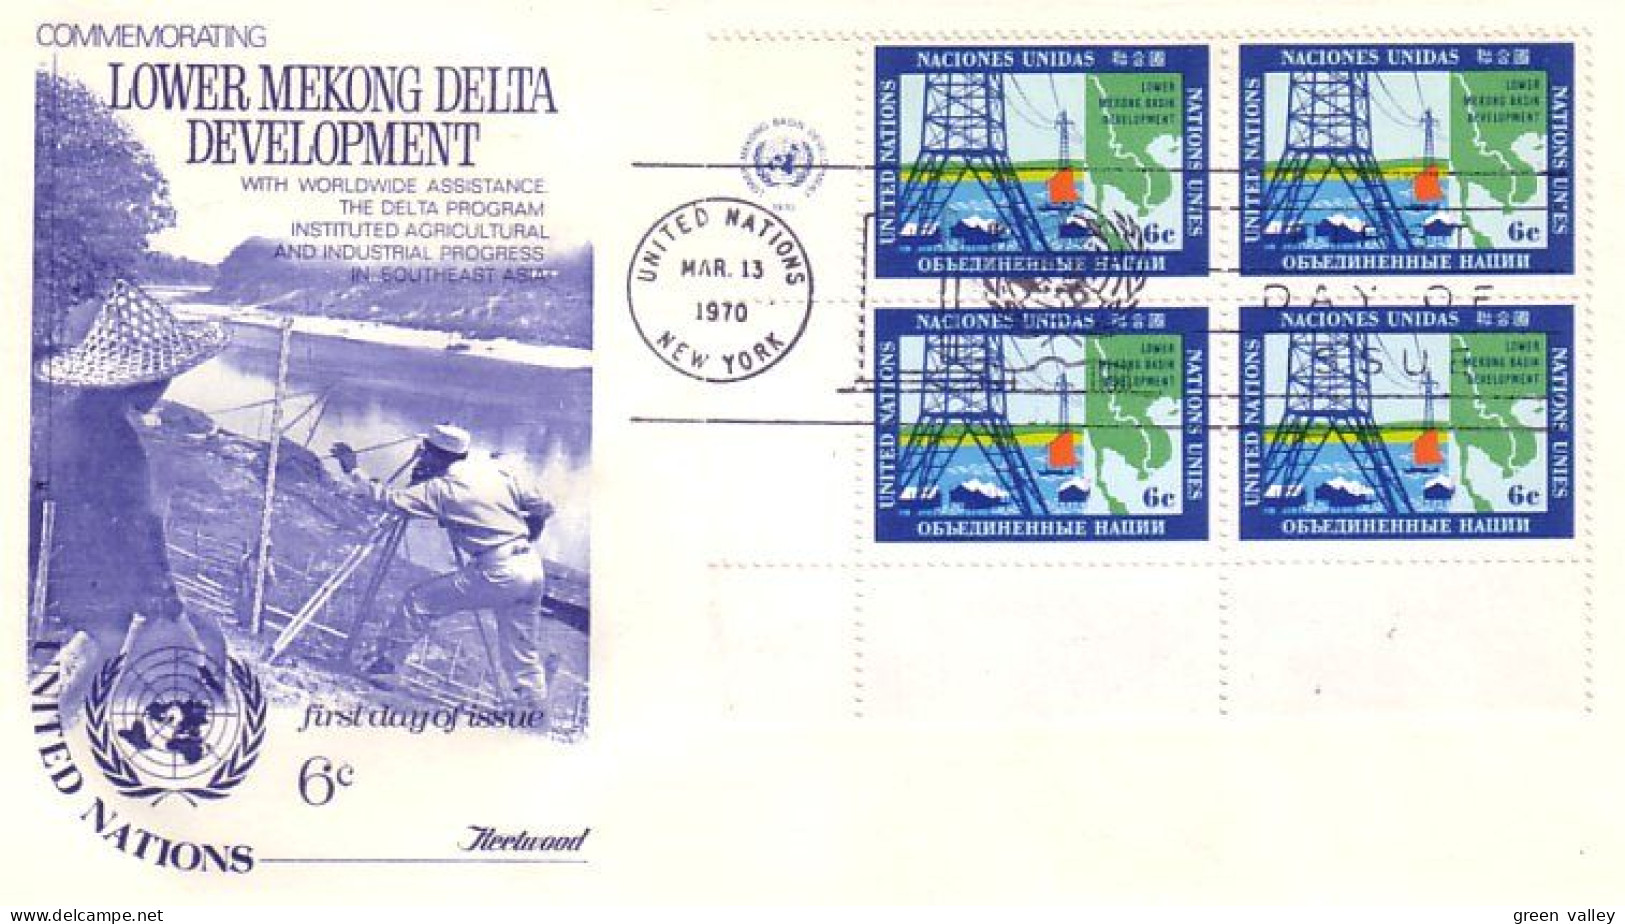 Hydro Mekong FDC Cover ( A91 759) - Water